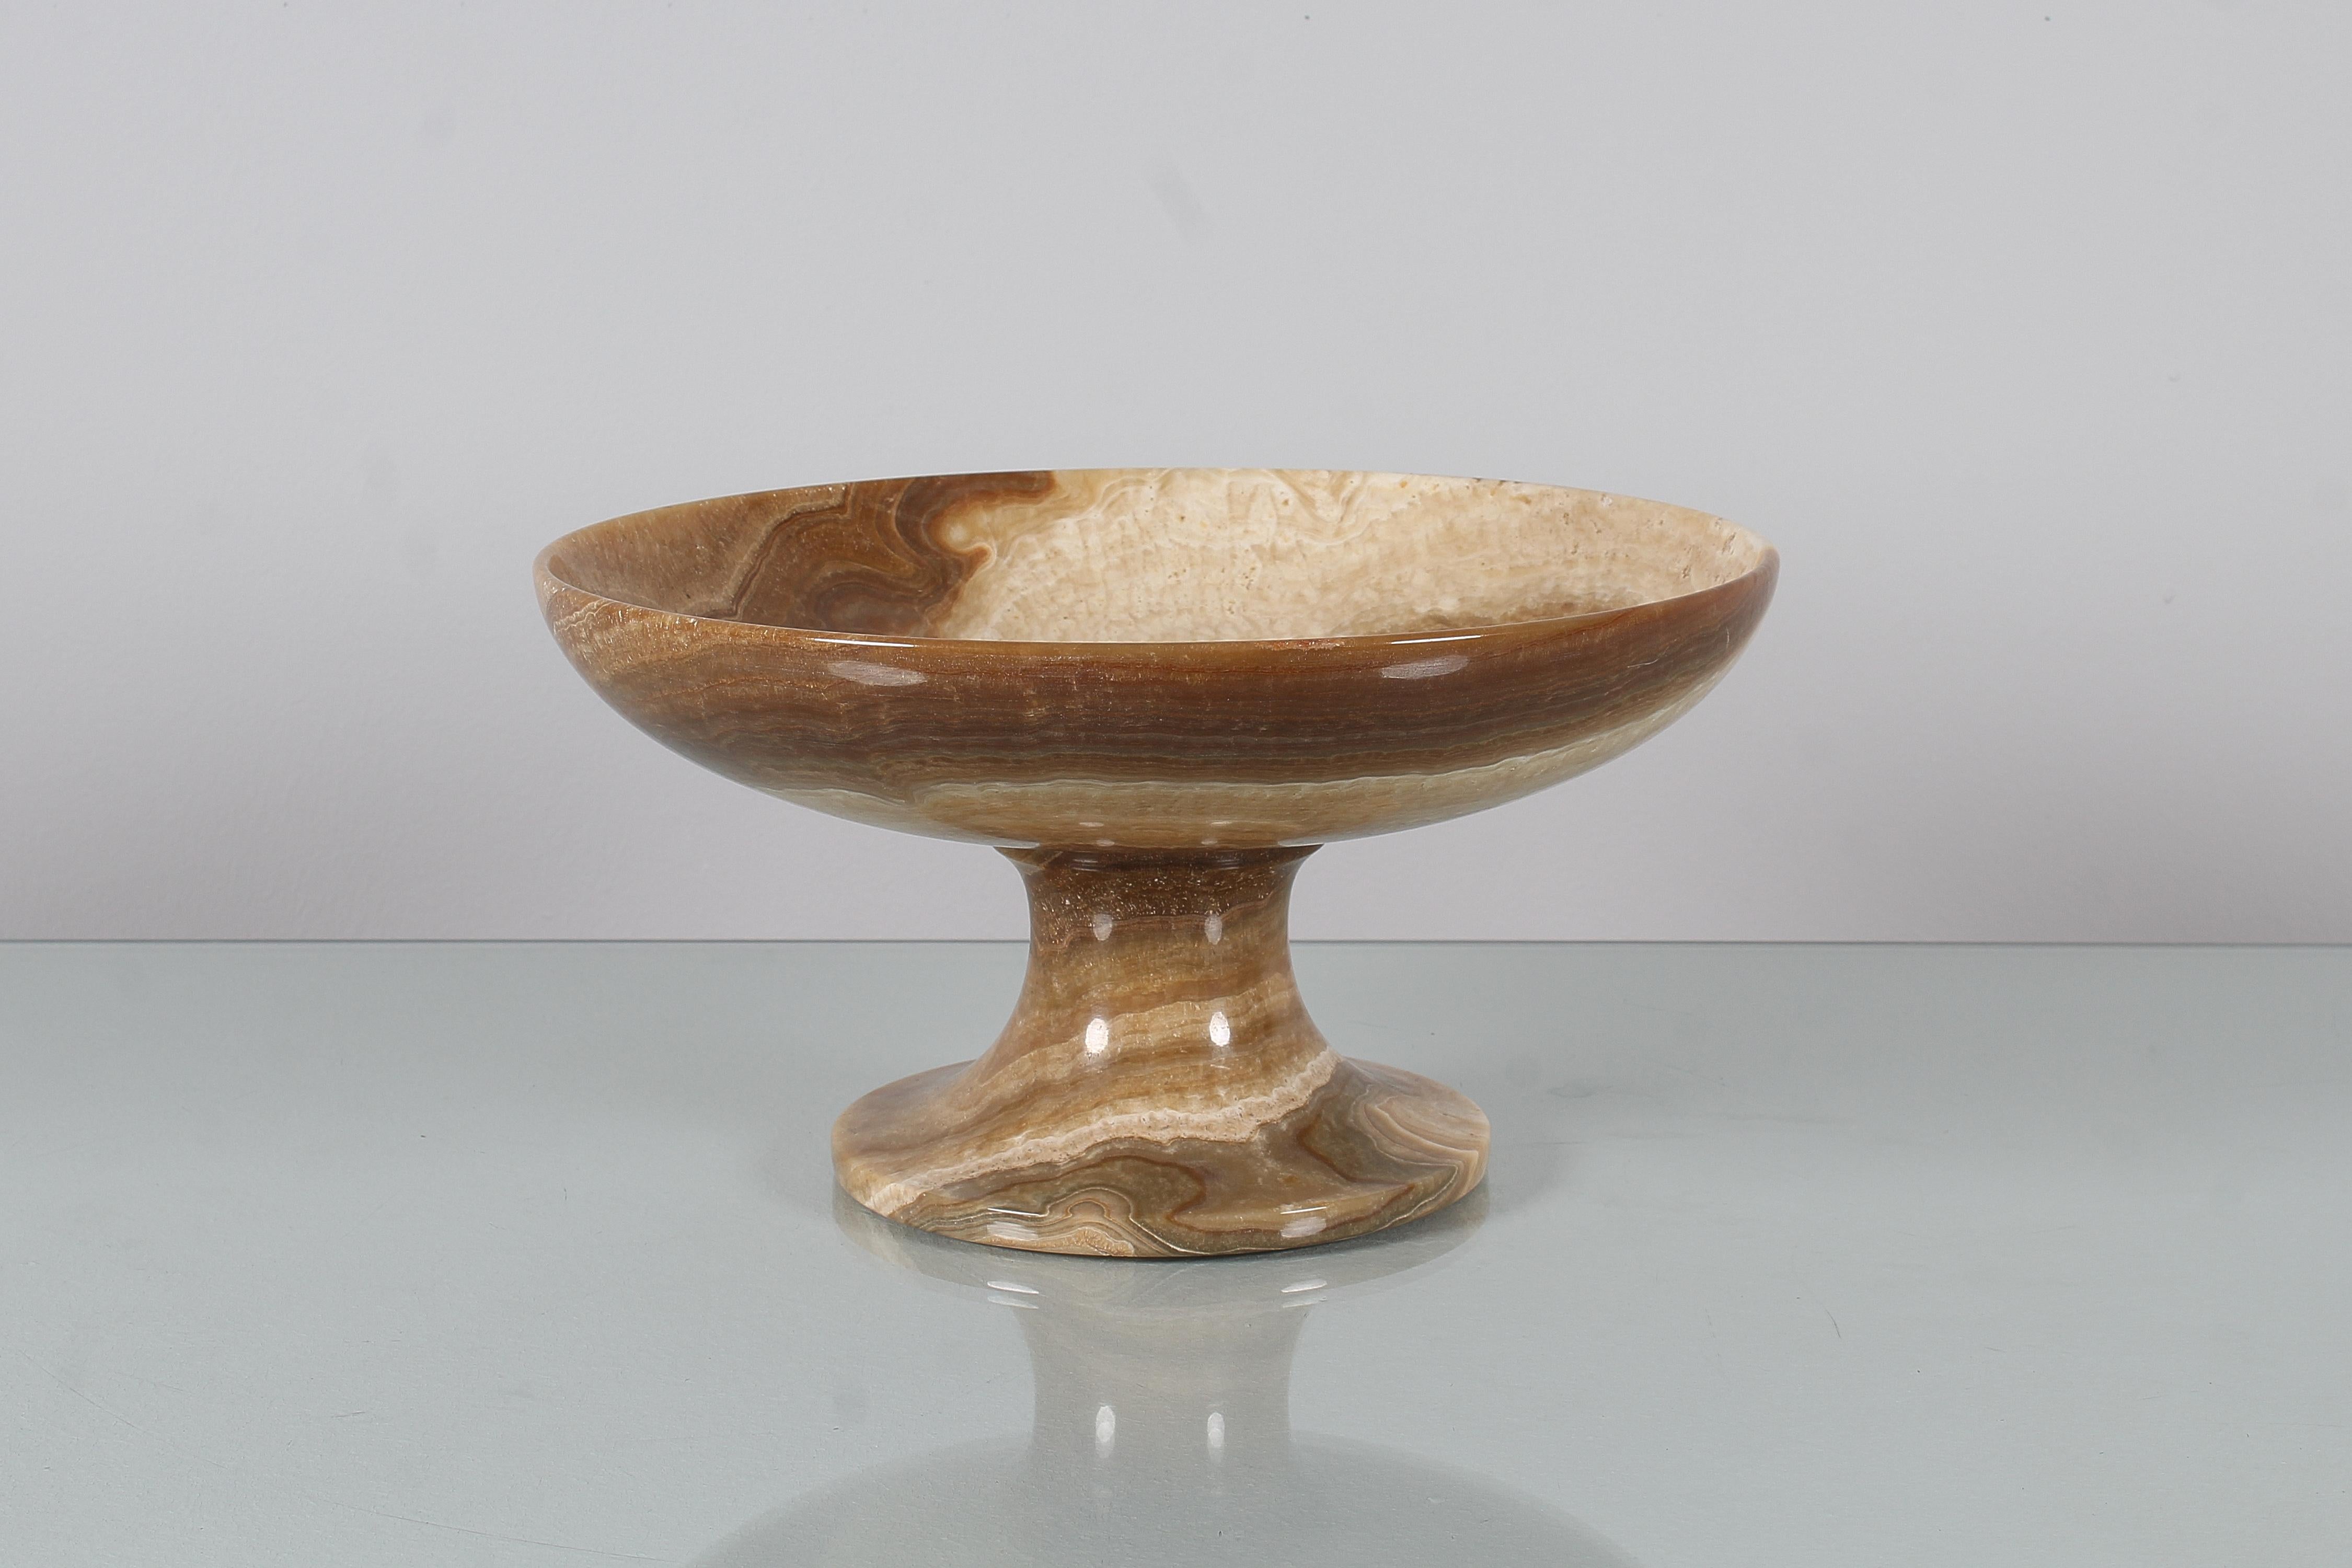 Very elegant circular centerpiece with shaped central foot entirely in polished and ground marble. In the style of Angelo Mangiarotti, Italian creation worthy of the 60s
Wear consistent with age and use.